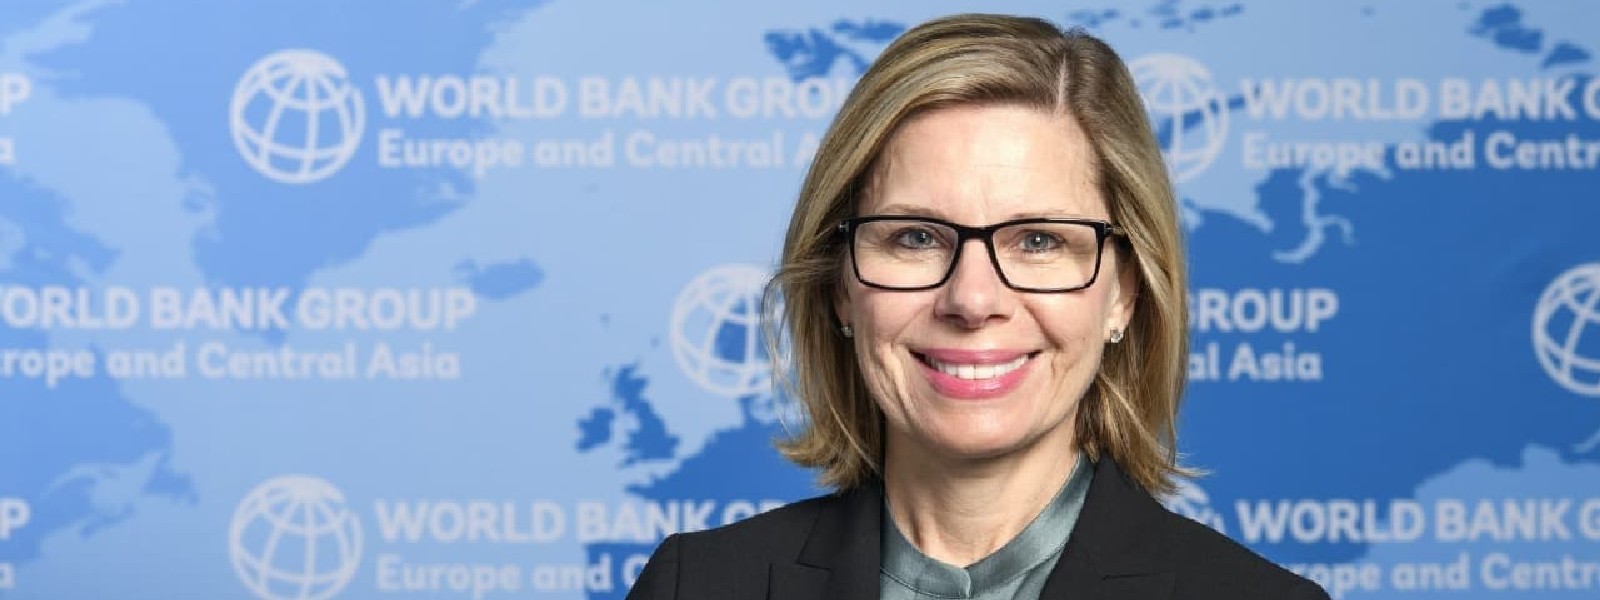 World Bank MD stresses need to pursue reforms